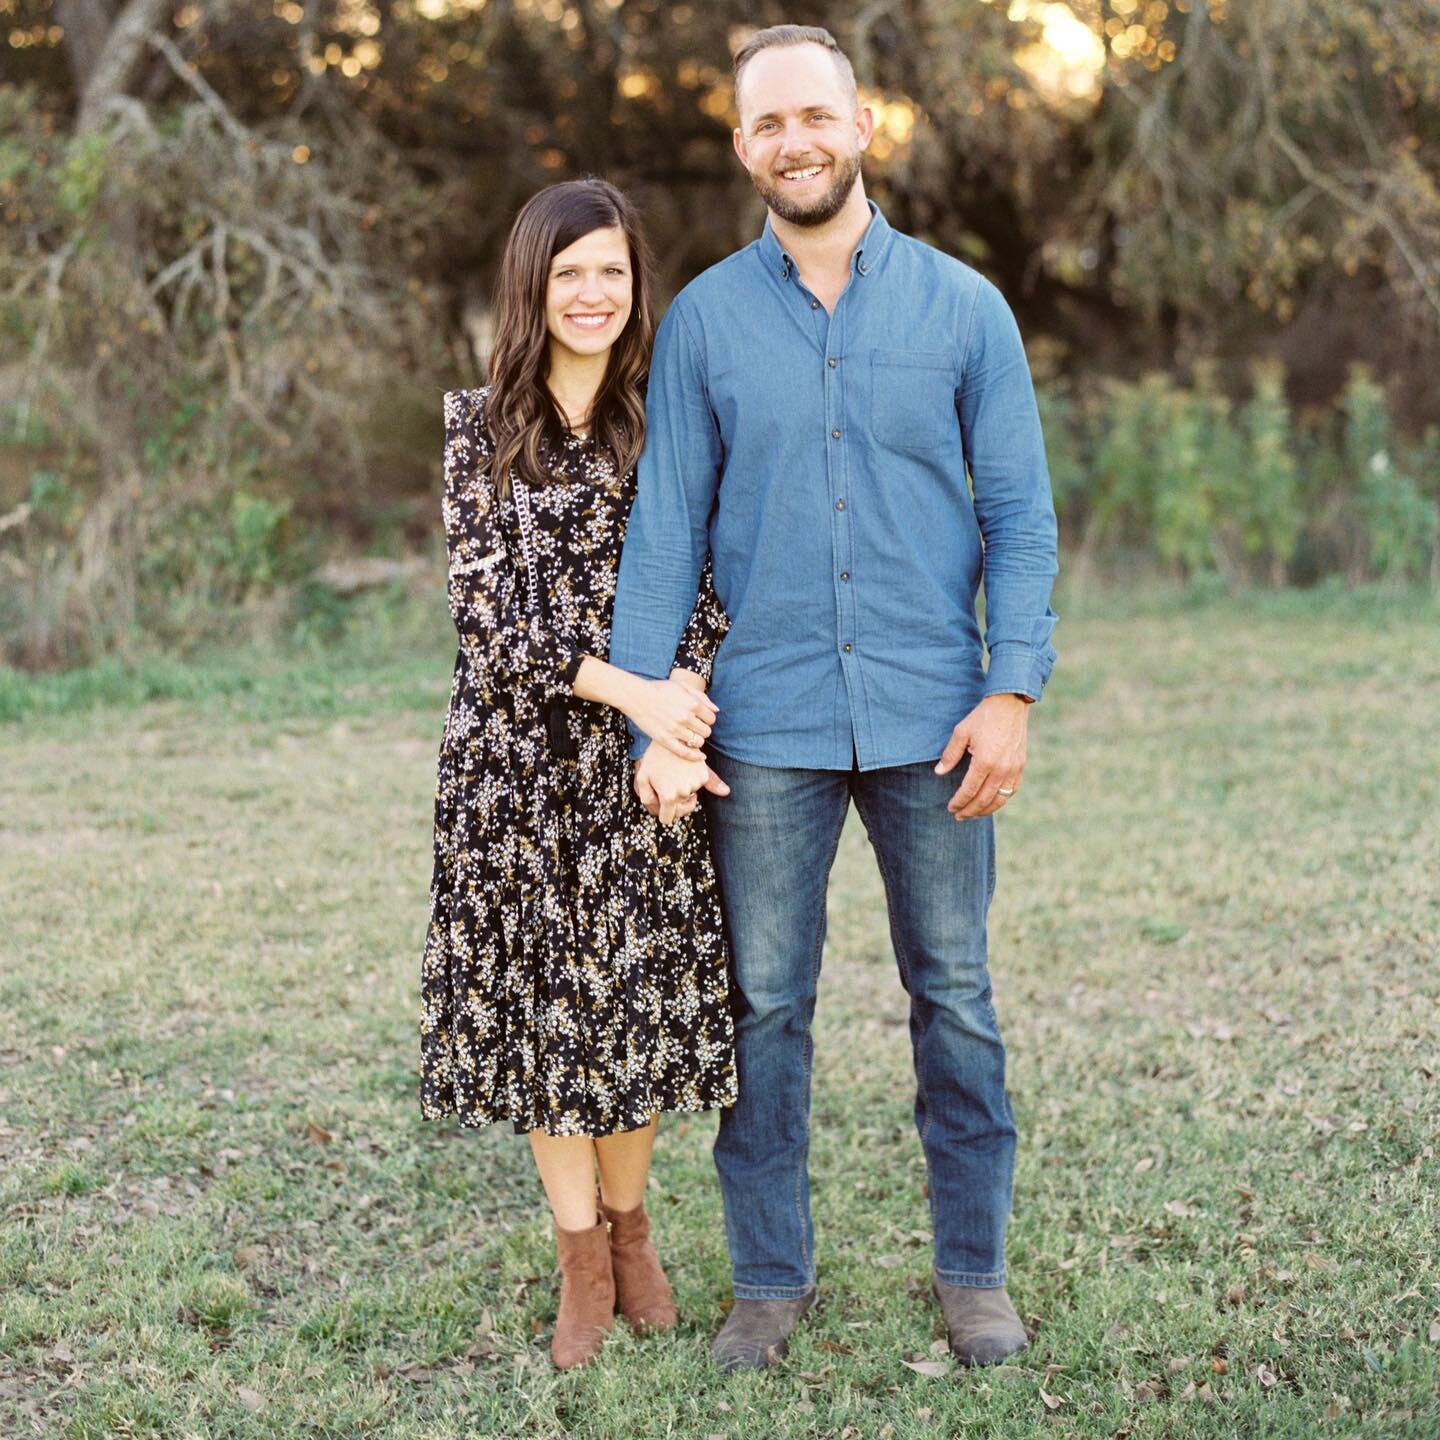 We are Luke and Rachel Whyte - founders and owners of Whyte Oak Homes - specializing in custom home builds and renovations in the Waco, TX area.
We&rsquo;ve been married 8 years and have 4 kids ages 1.5-6. (Swipe to see what our life looks like most 